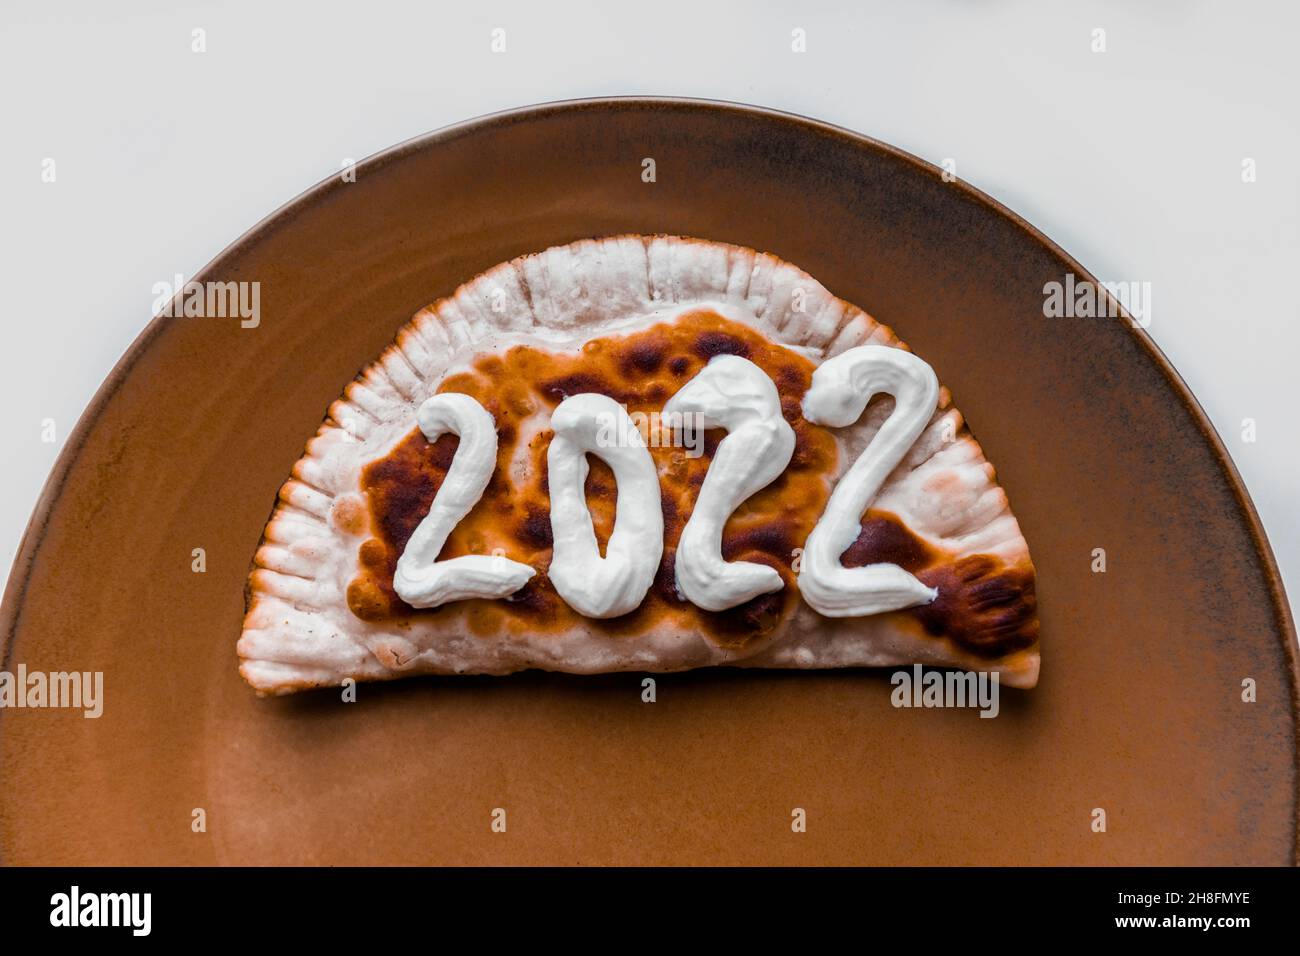 The number 2022 is written on a cheburek. New year 2022 is coming soon. Stock Photo